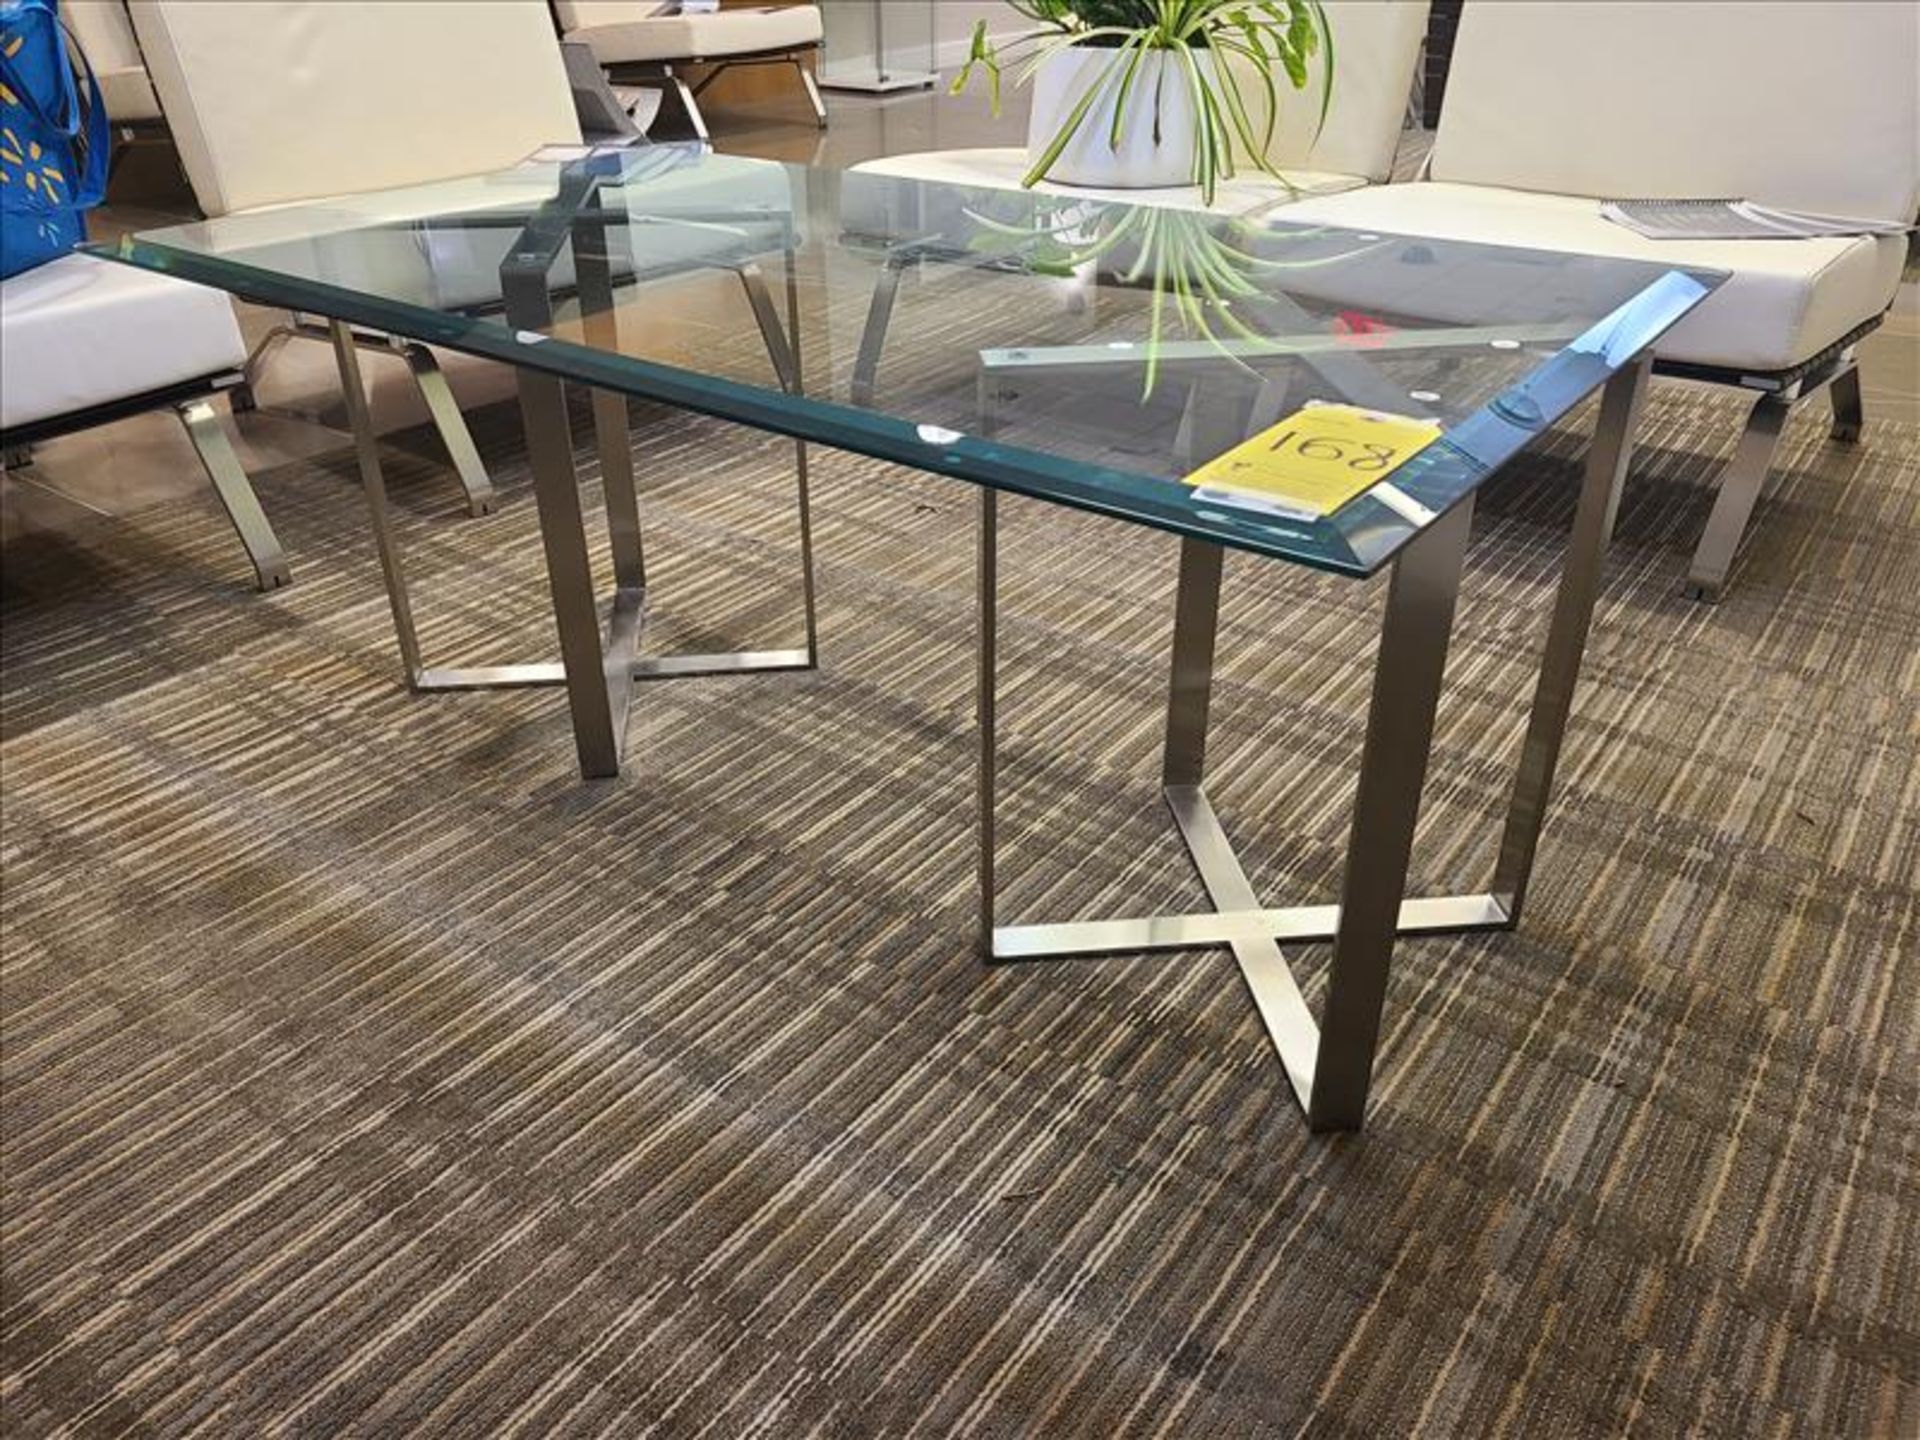 Tempered Glass Table, w/ s/s base, approx. 48 in. x 28 in. x 20 in. (Qty 1) (Floor 3) - Image 2 of 2